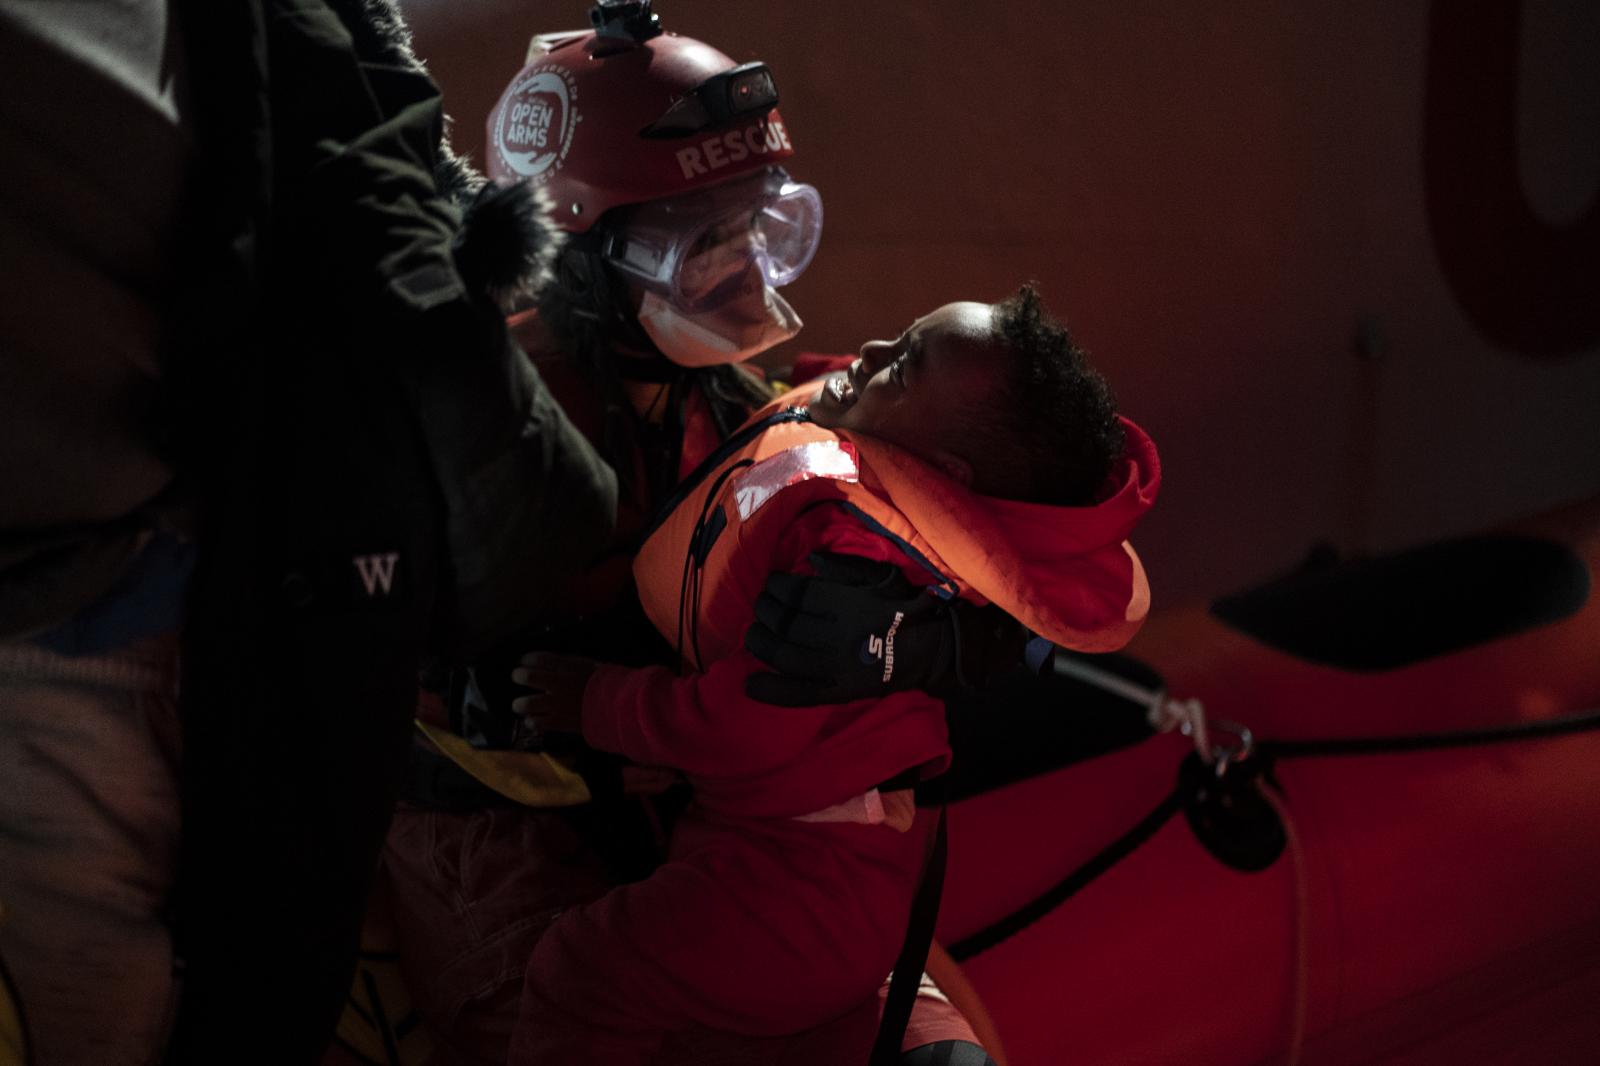 A baby is rescued by aid worker...31, 2020. (AP Photo/Joan Mateu)